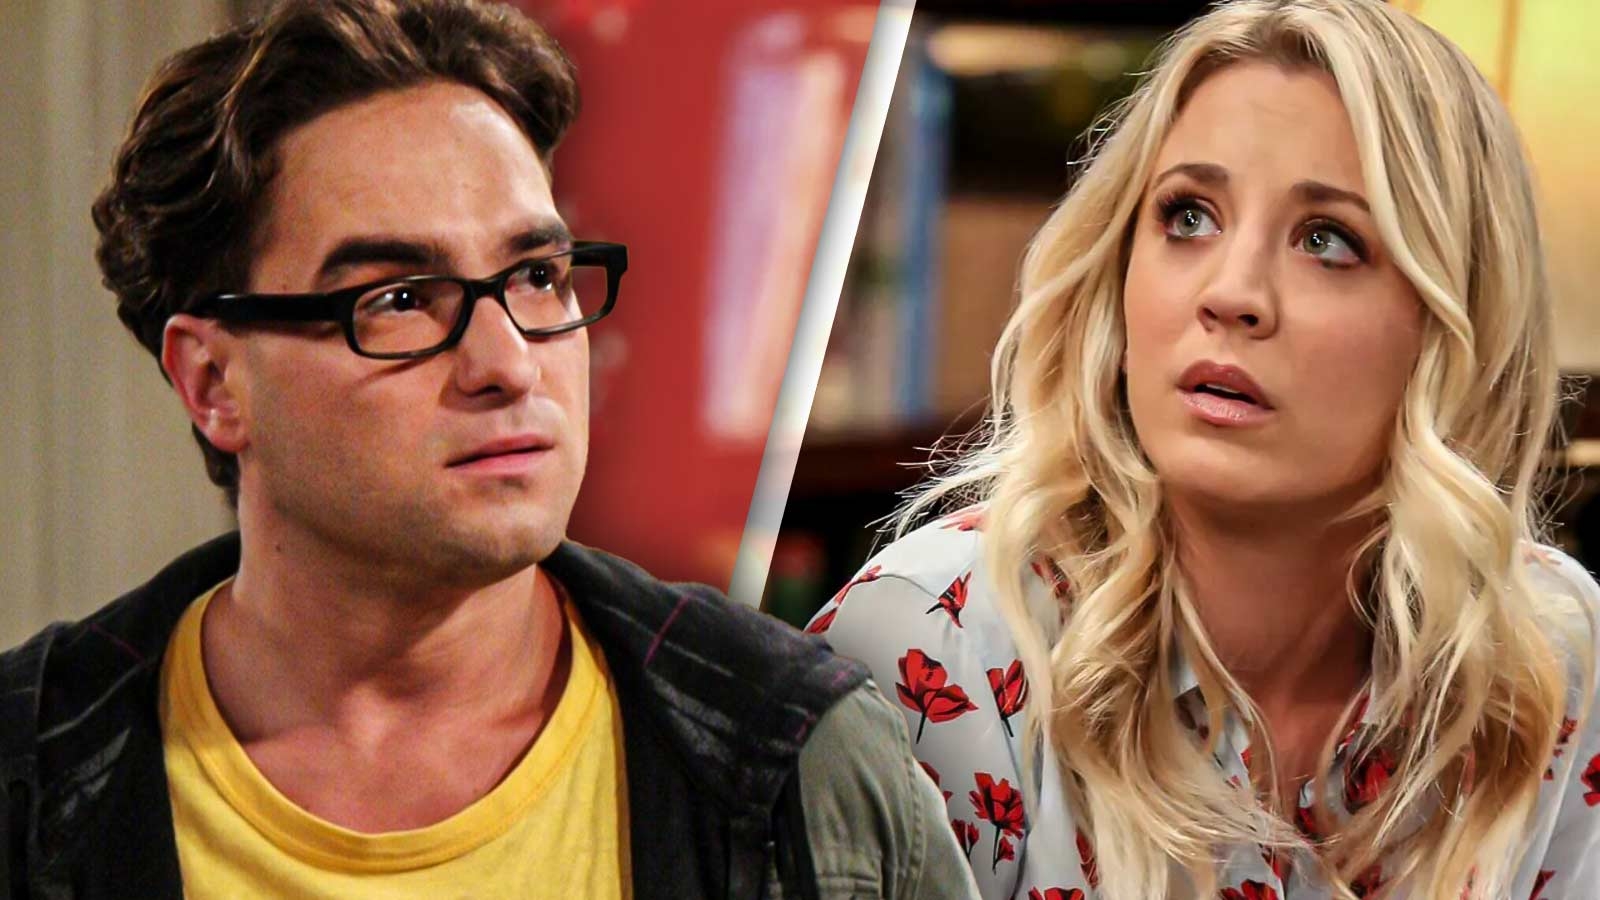 The Big Bang Theory: 5 Times Leonard Was Horrible to Penny Will Make You Hate His Sheer Hypocrisy